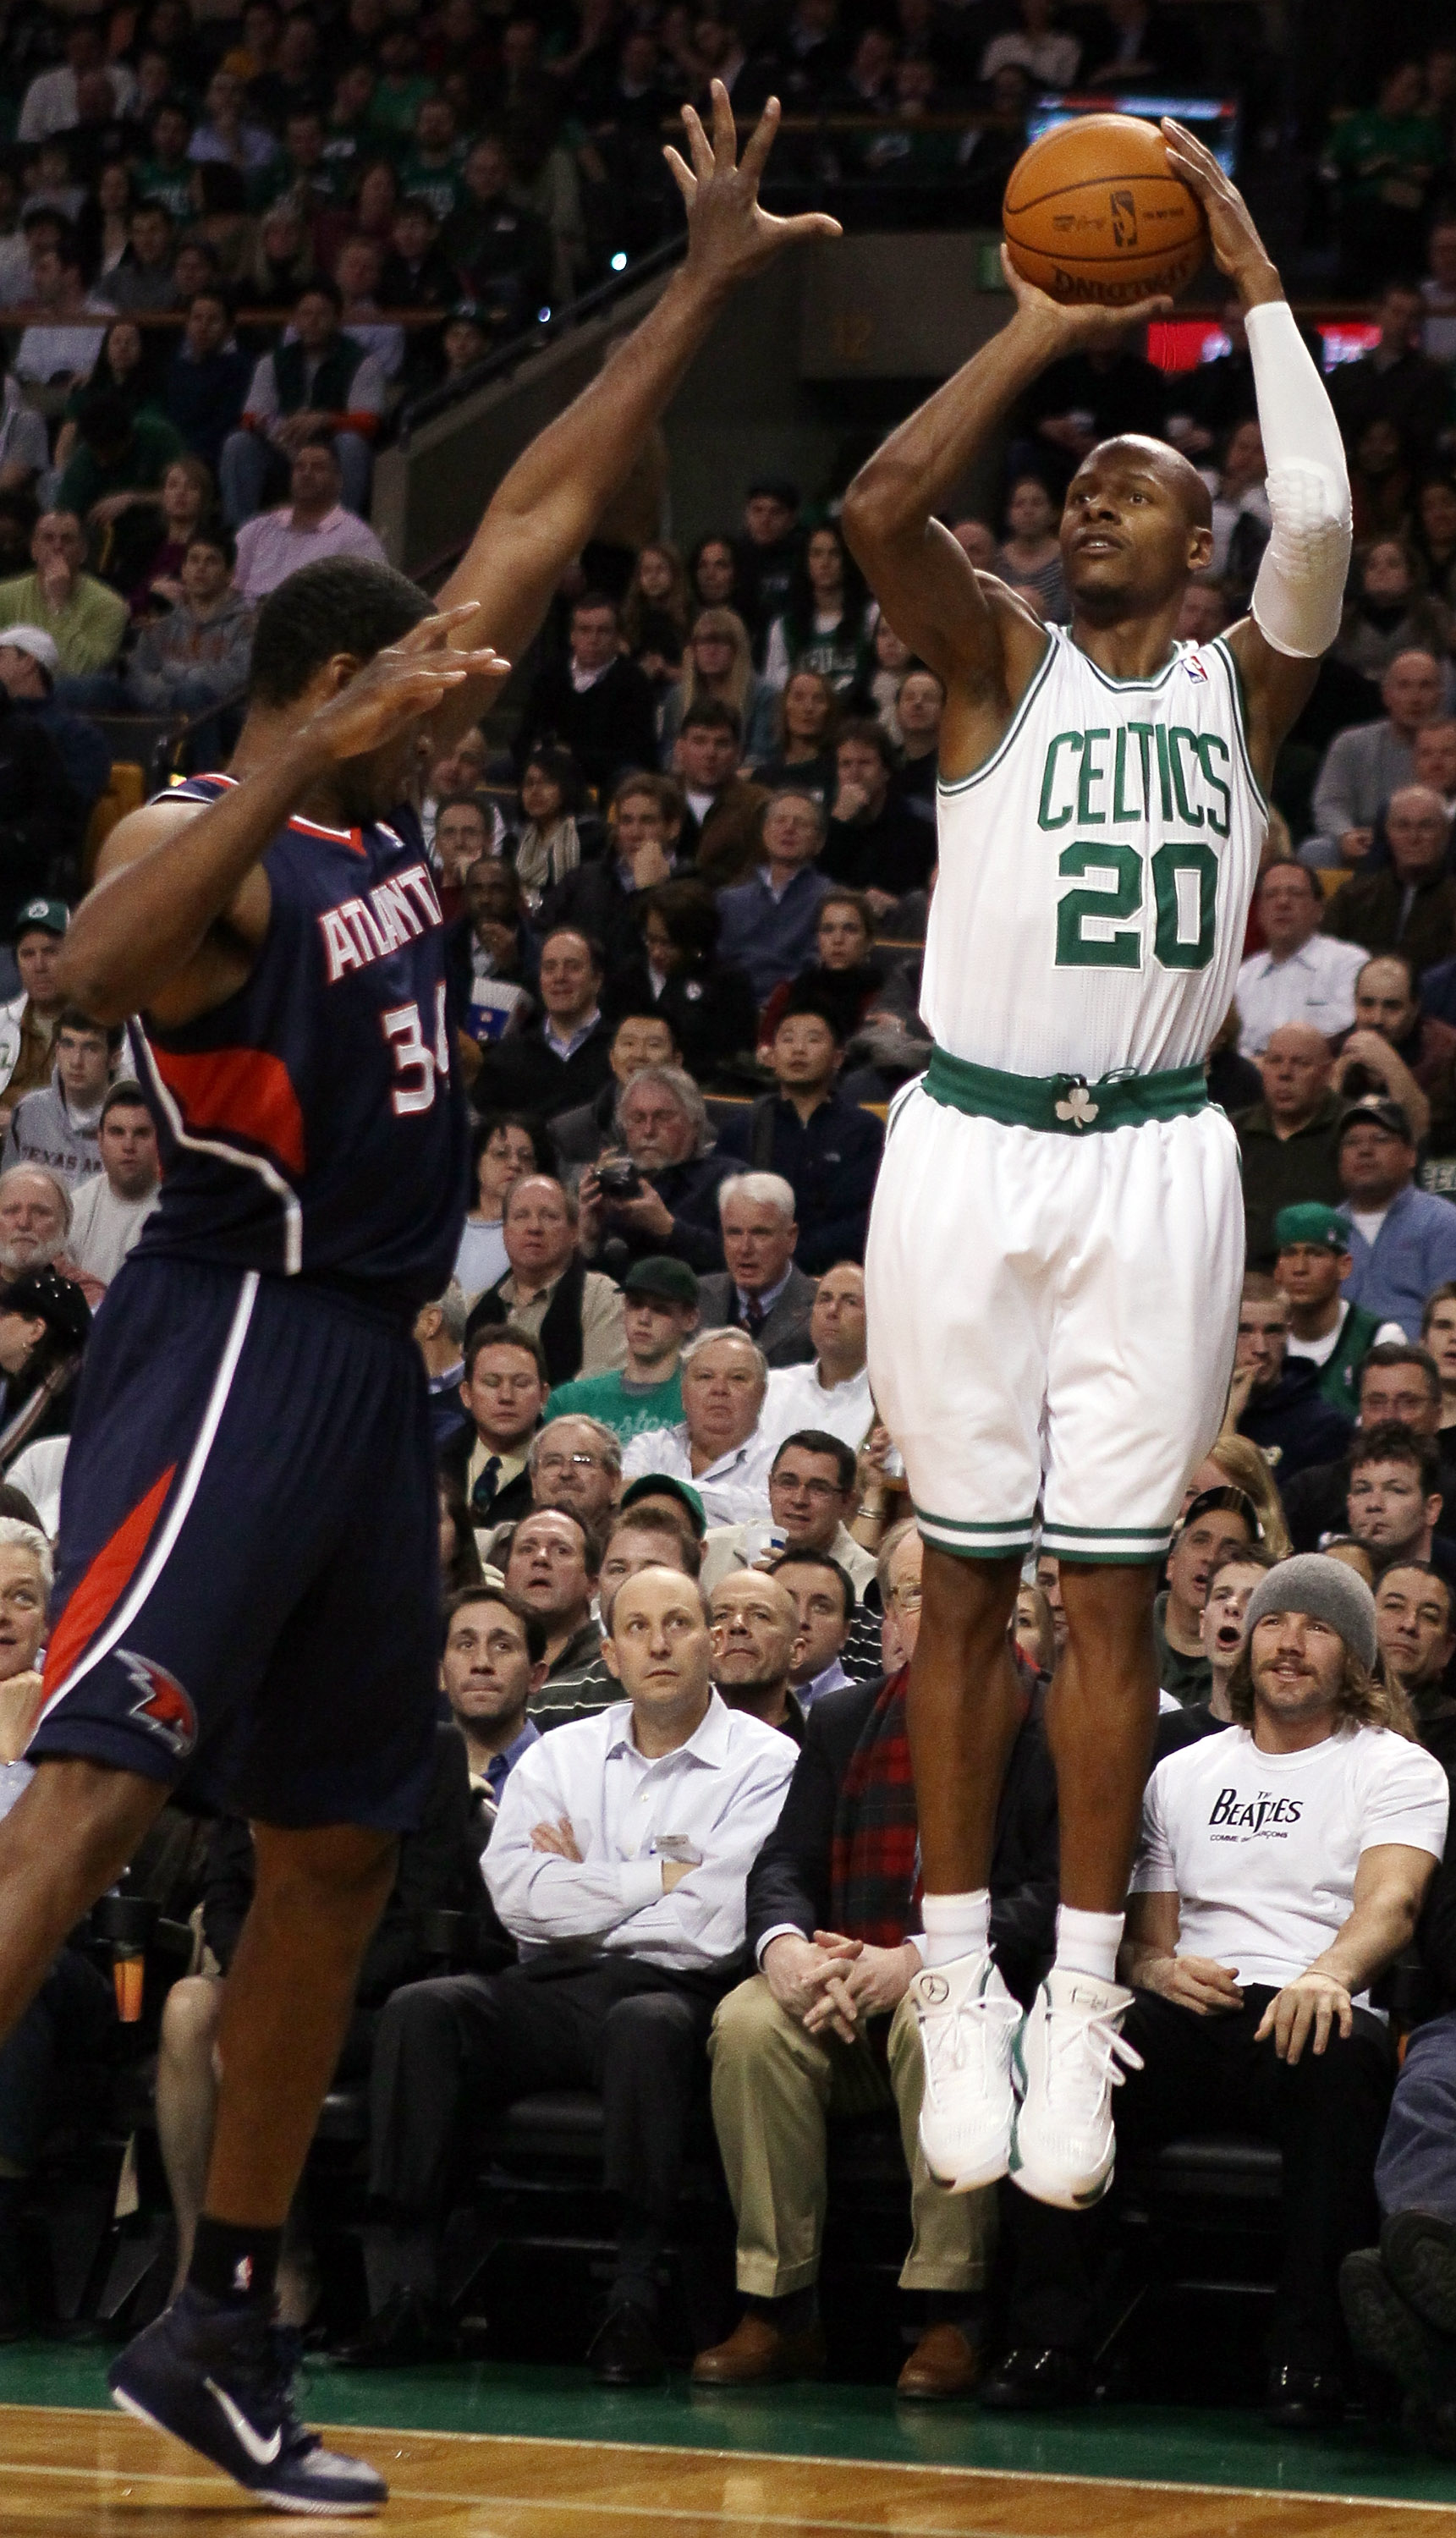 BOSTON, MA - DECEMBER 16:  Ray Allen #20 of the Boston Celtics takes a shot as Jason Collins #34 of the Atlanta Hawks on December 16, 2010 at the TD Garden in Boston, Massachusetts. NOTE TO USER: User expressly acknowledges and agrees that, by downloading